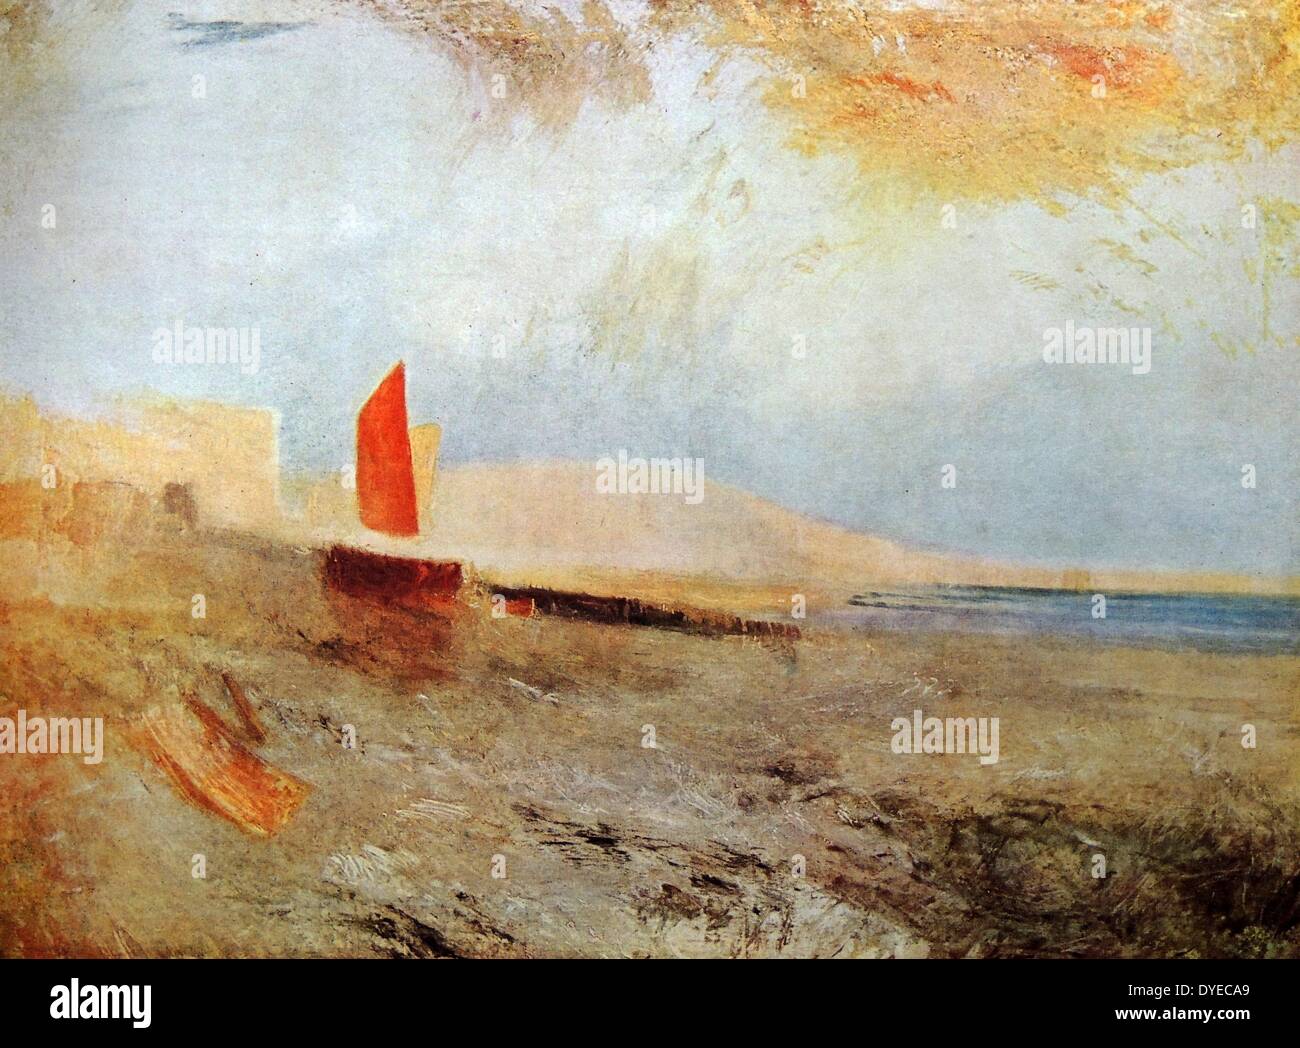 Watercolour landscape painting titled 'Hastings'. The painting depicts a single boat on shore with an orange sail. By Joseph Mallord William Turner (1775 - 1851) English romantic landscape painter. Dated 1818. Stock Photo